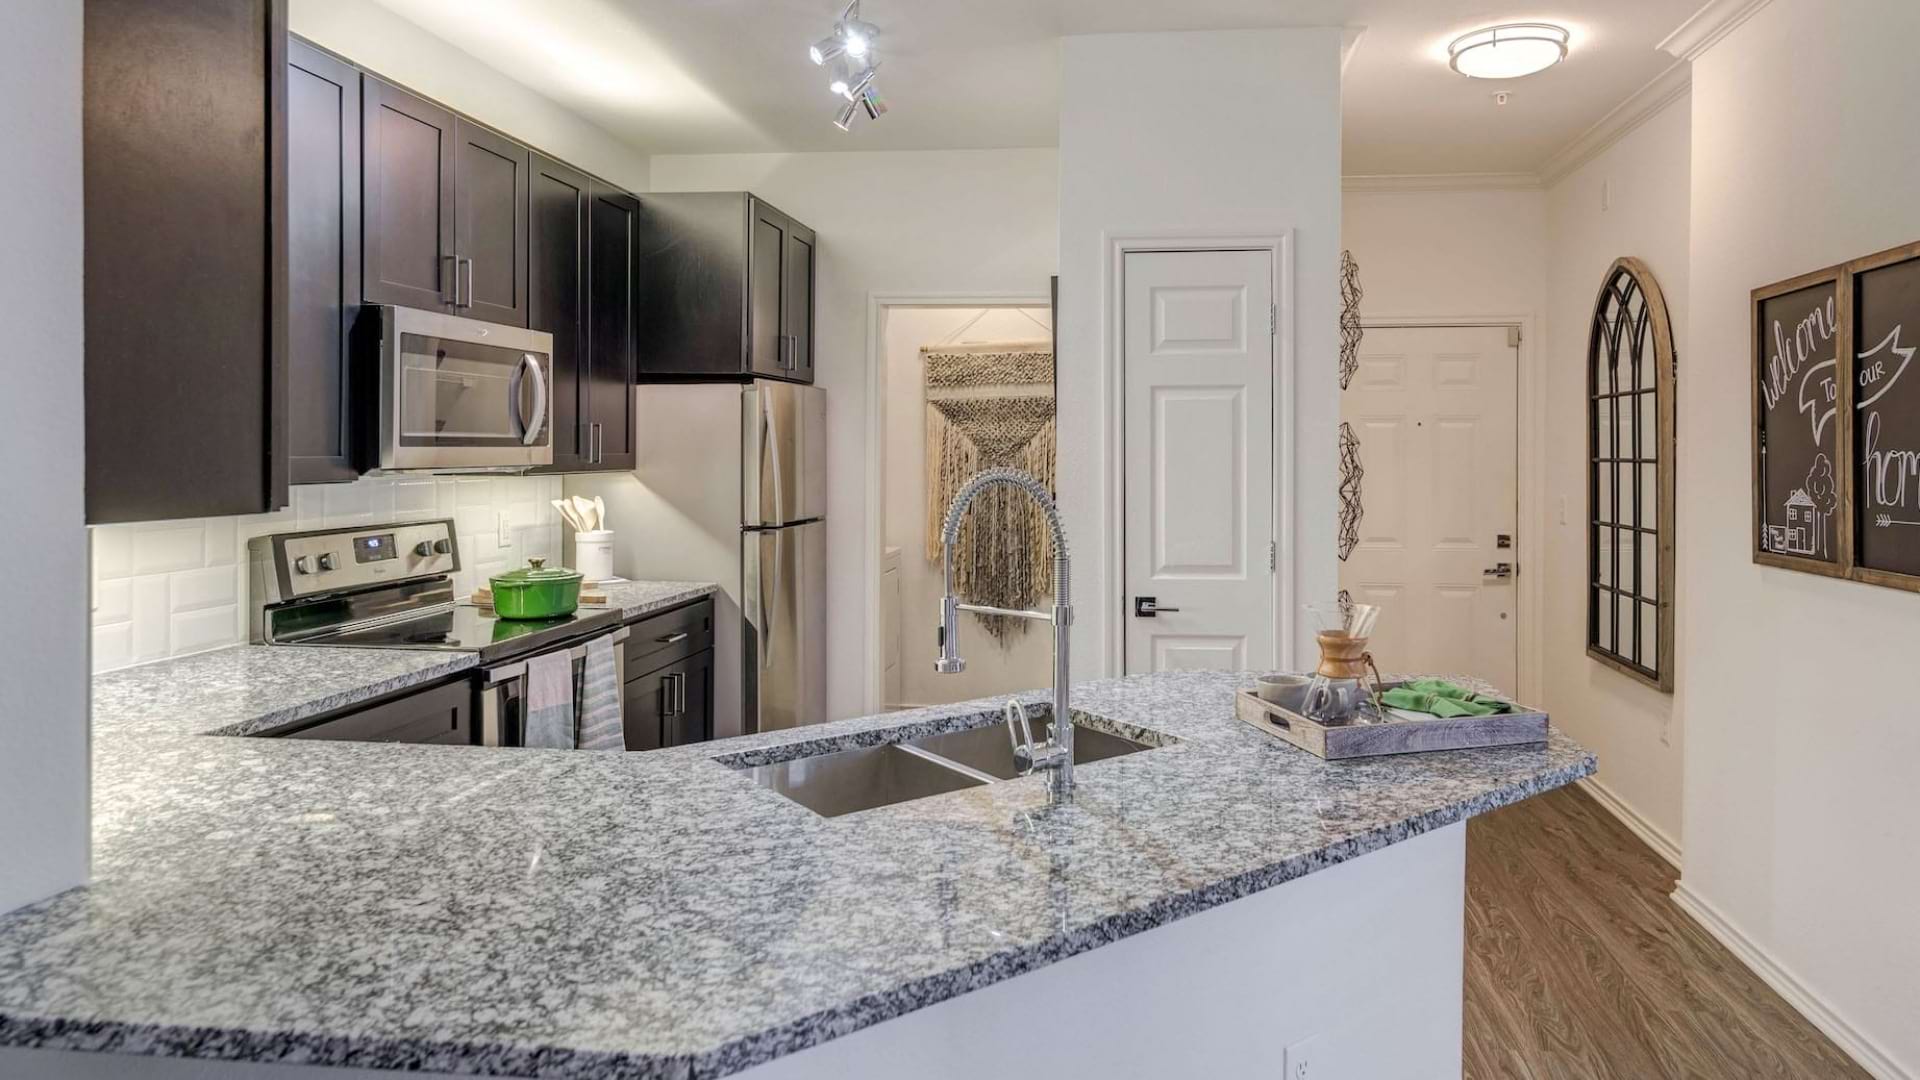 Apartment Kitchen With Granite Countertops At Our Luxury Apartments In South Austin, TX